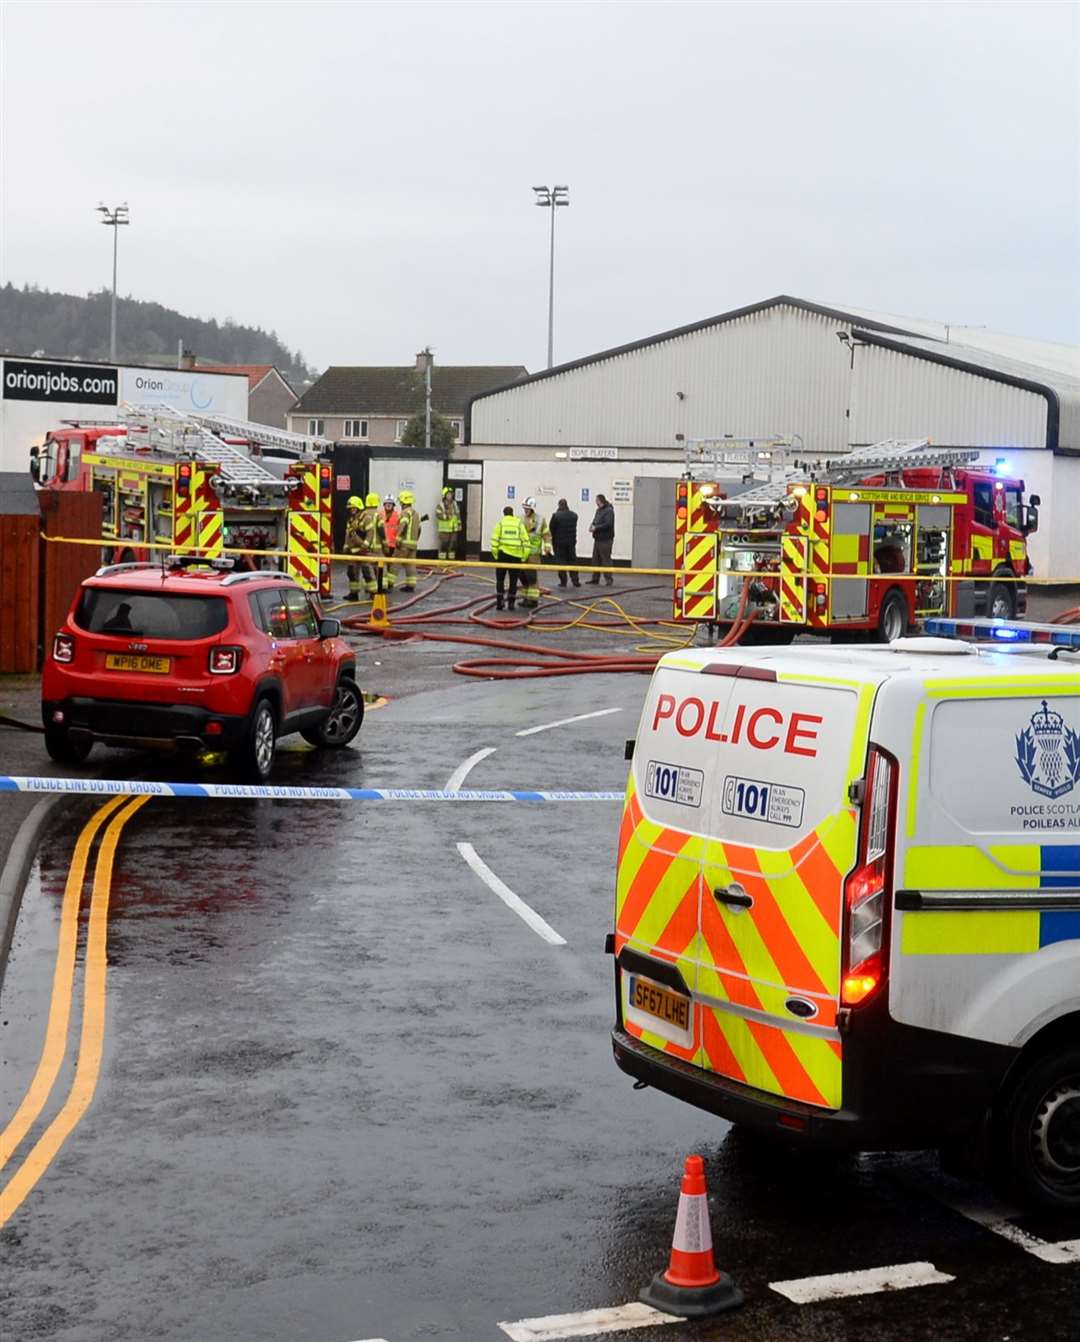 Fire broke out at Clachnacuddin's Grant Street Football Park on Christmas Eve.